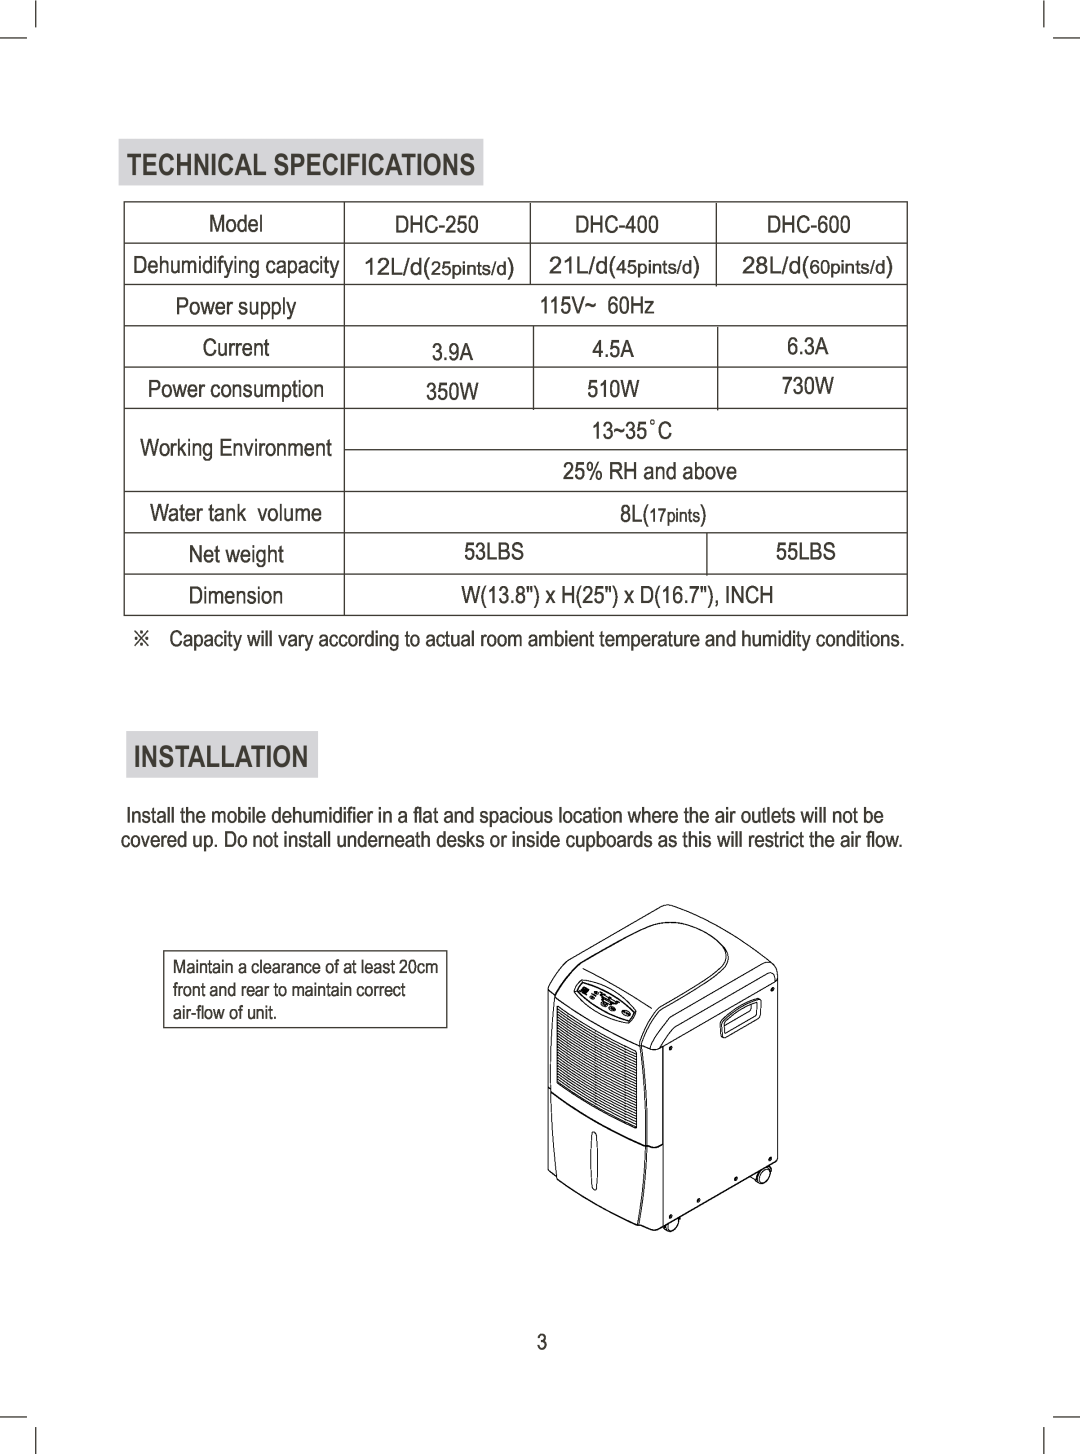 Daewoo DHC-400 Technical Specifications, Installation, Model, DHC-250, DHC-600, 115V~ 60Hz, Current, 6.3A, 13~35 C, 53LBS 